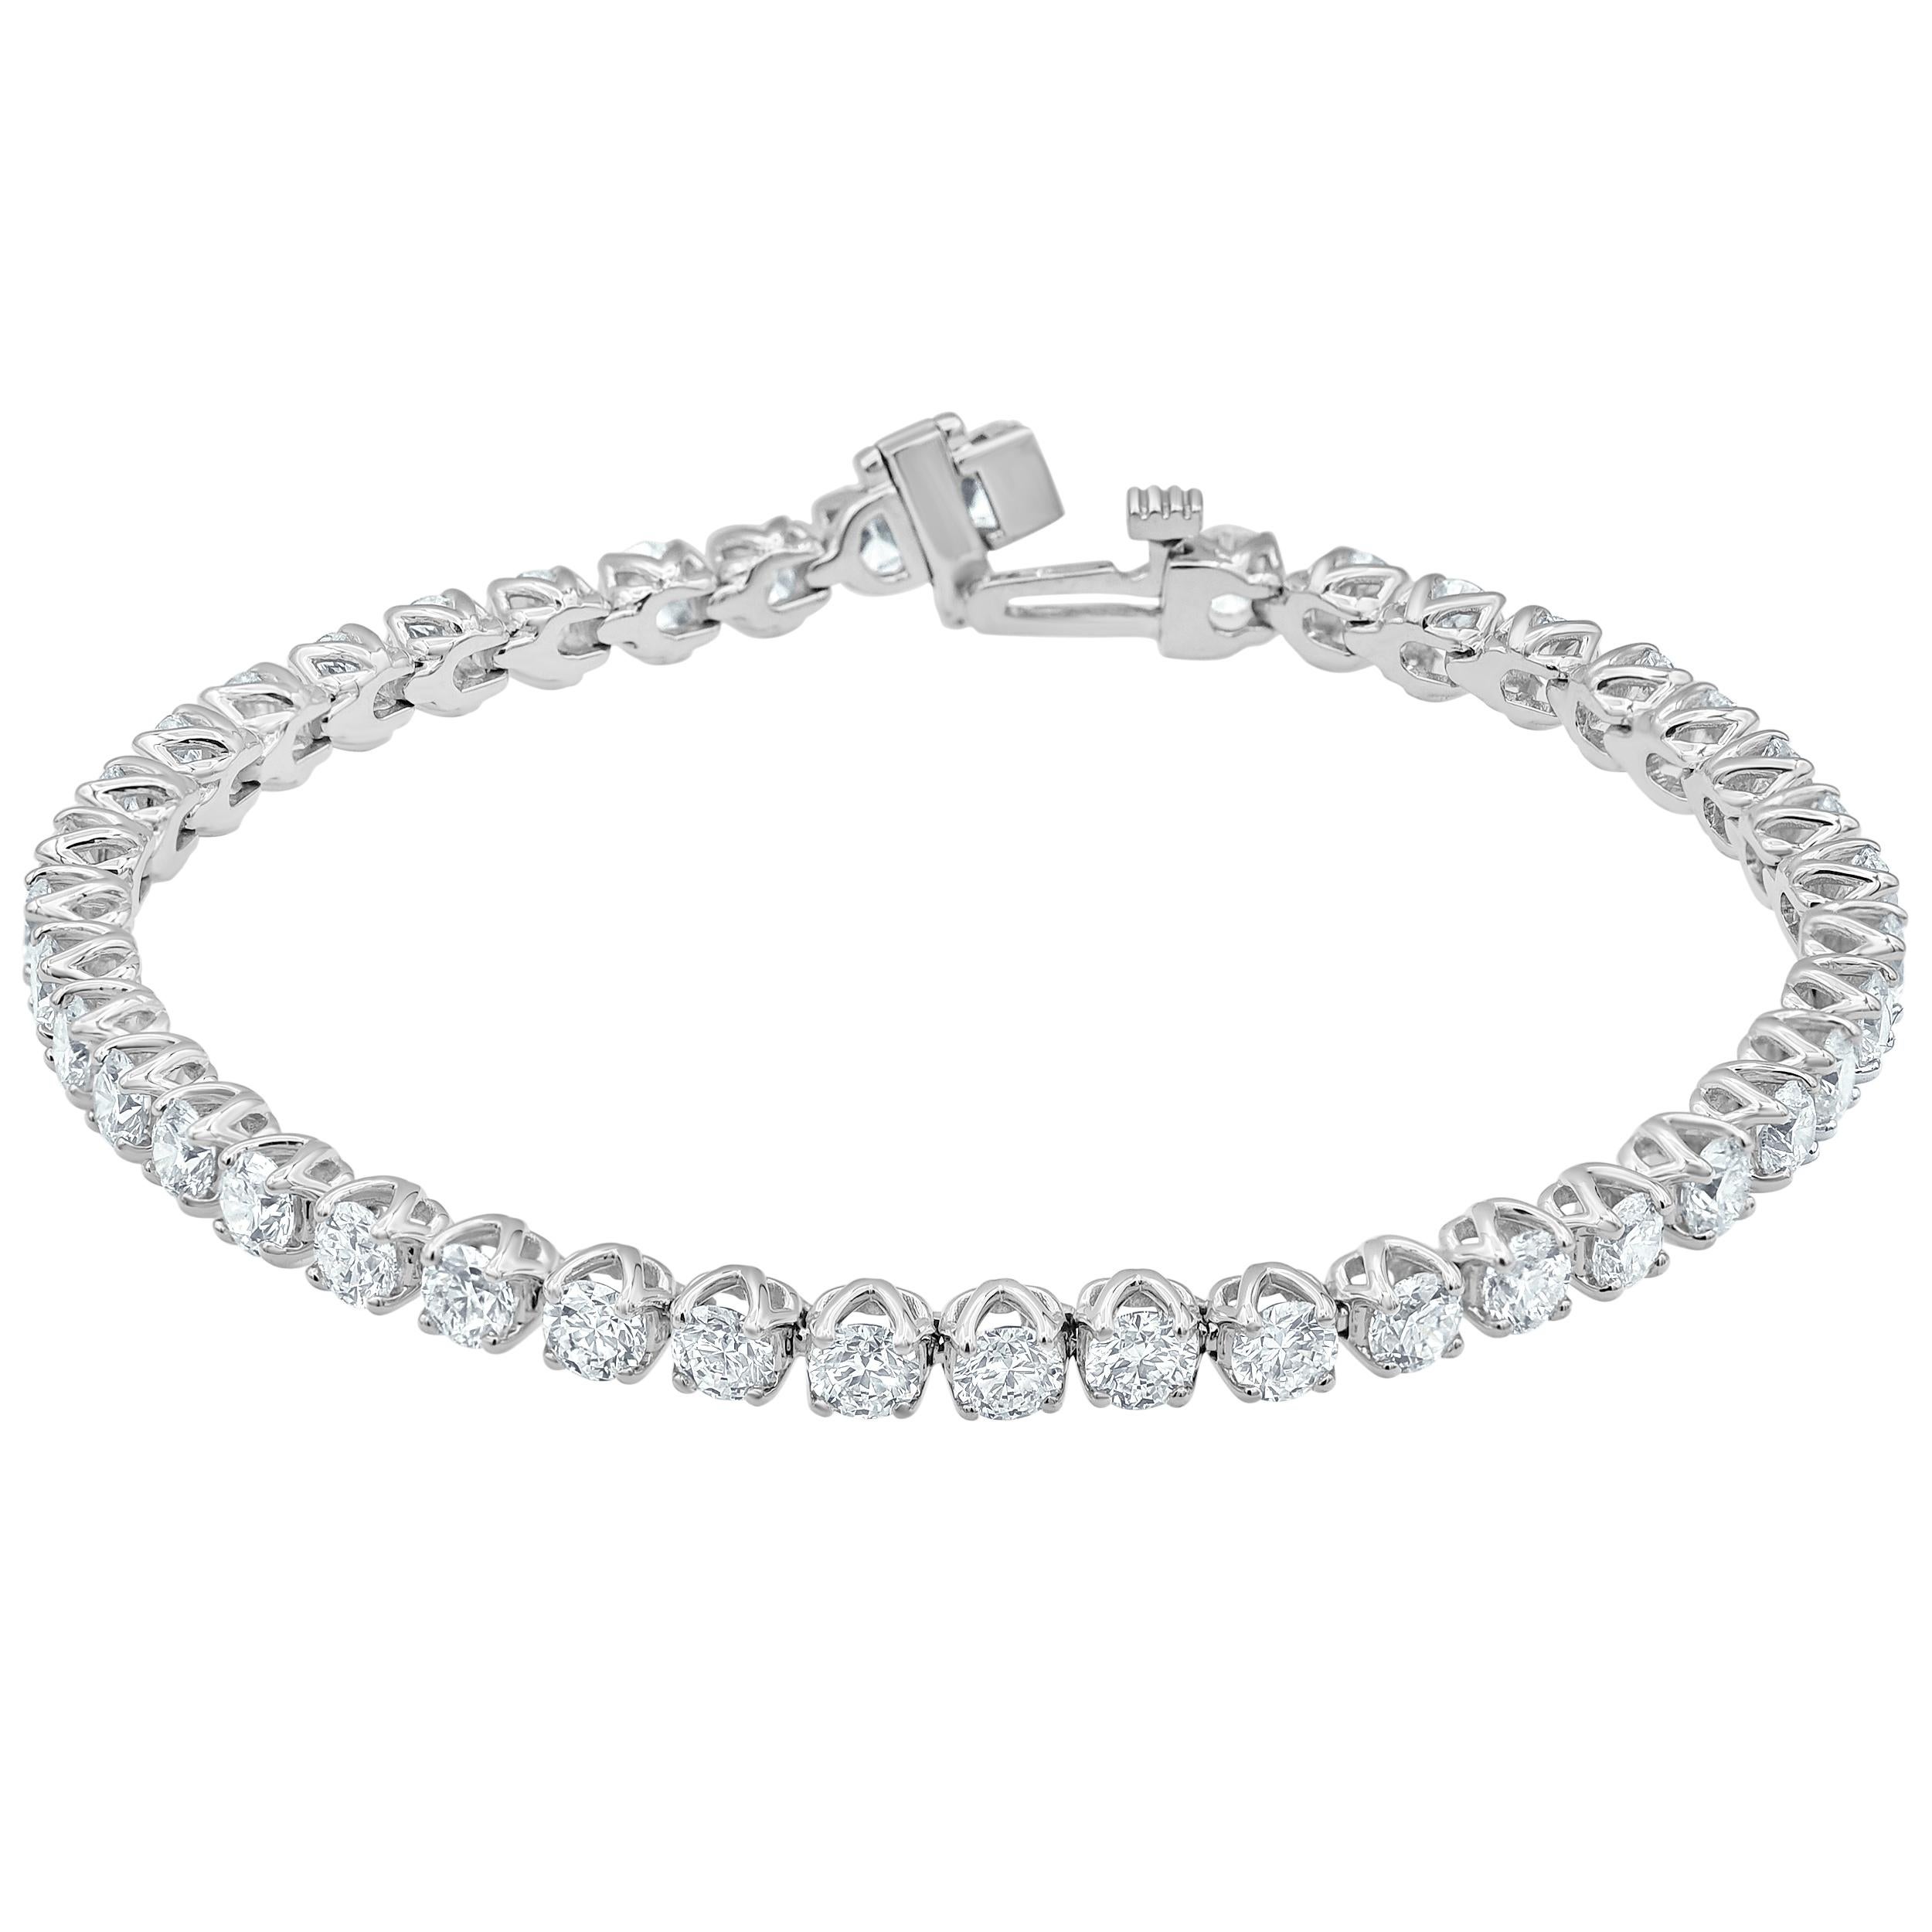 Your look isn't complete without this splendid diamond tennis bracelet. Fashioned in 14K white gold, this timeless design features sparkling 0.30 ct. diamonds - each with a color rank of I and clarity of SI2 - in a luxurious row. Resplendent with 10